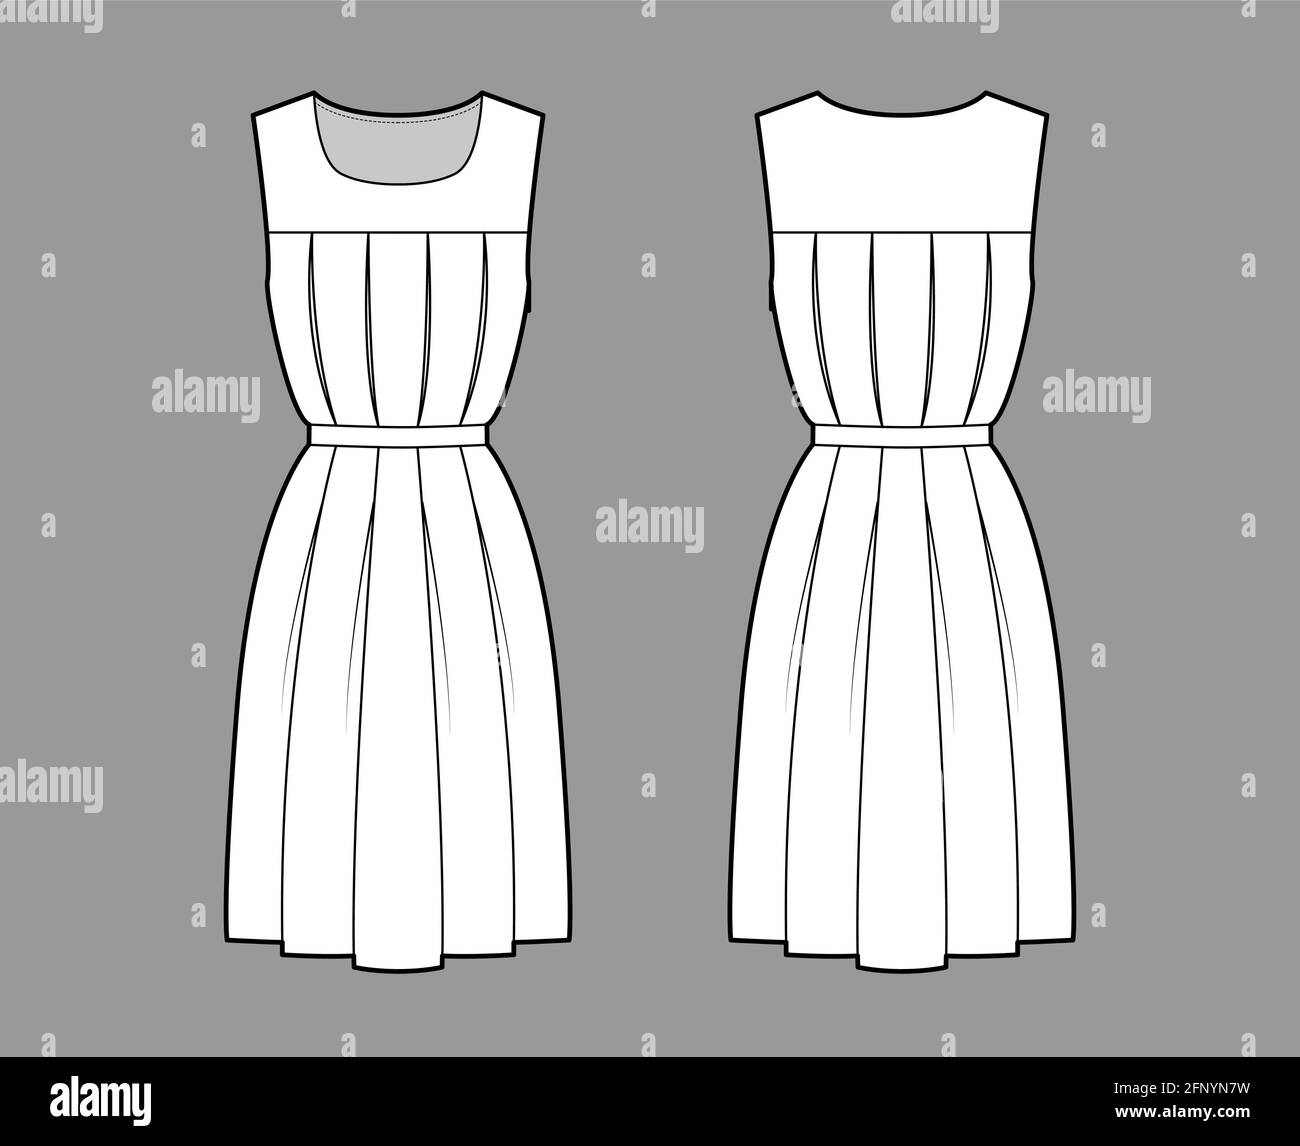 Dress gymslip technical fashion illustration with knee length A-line ...